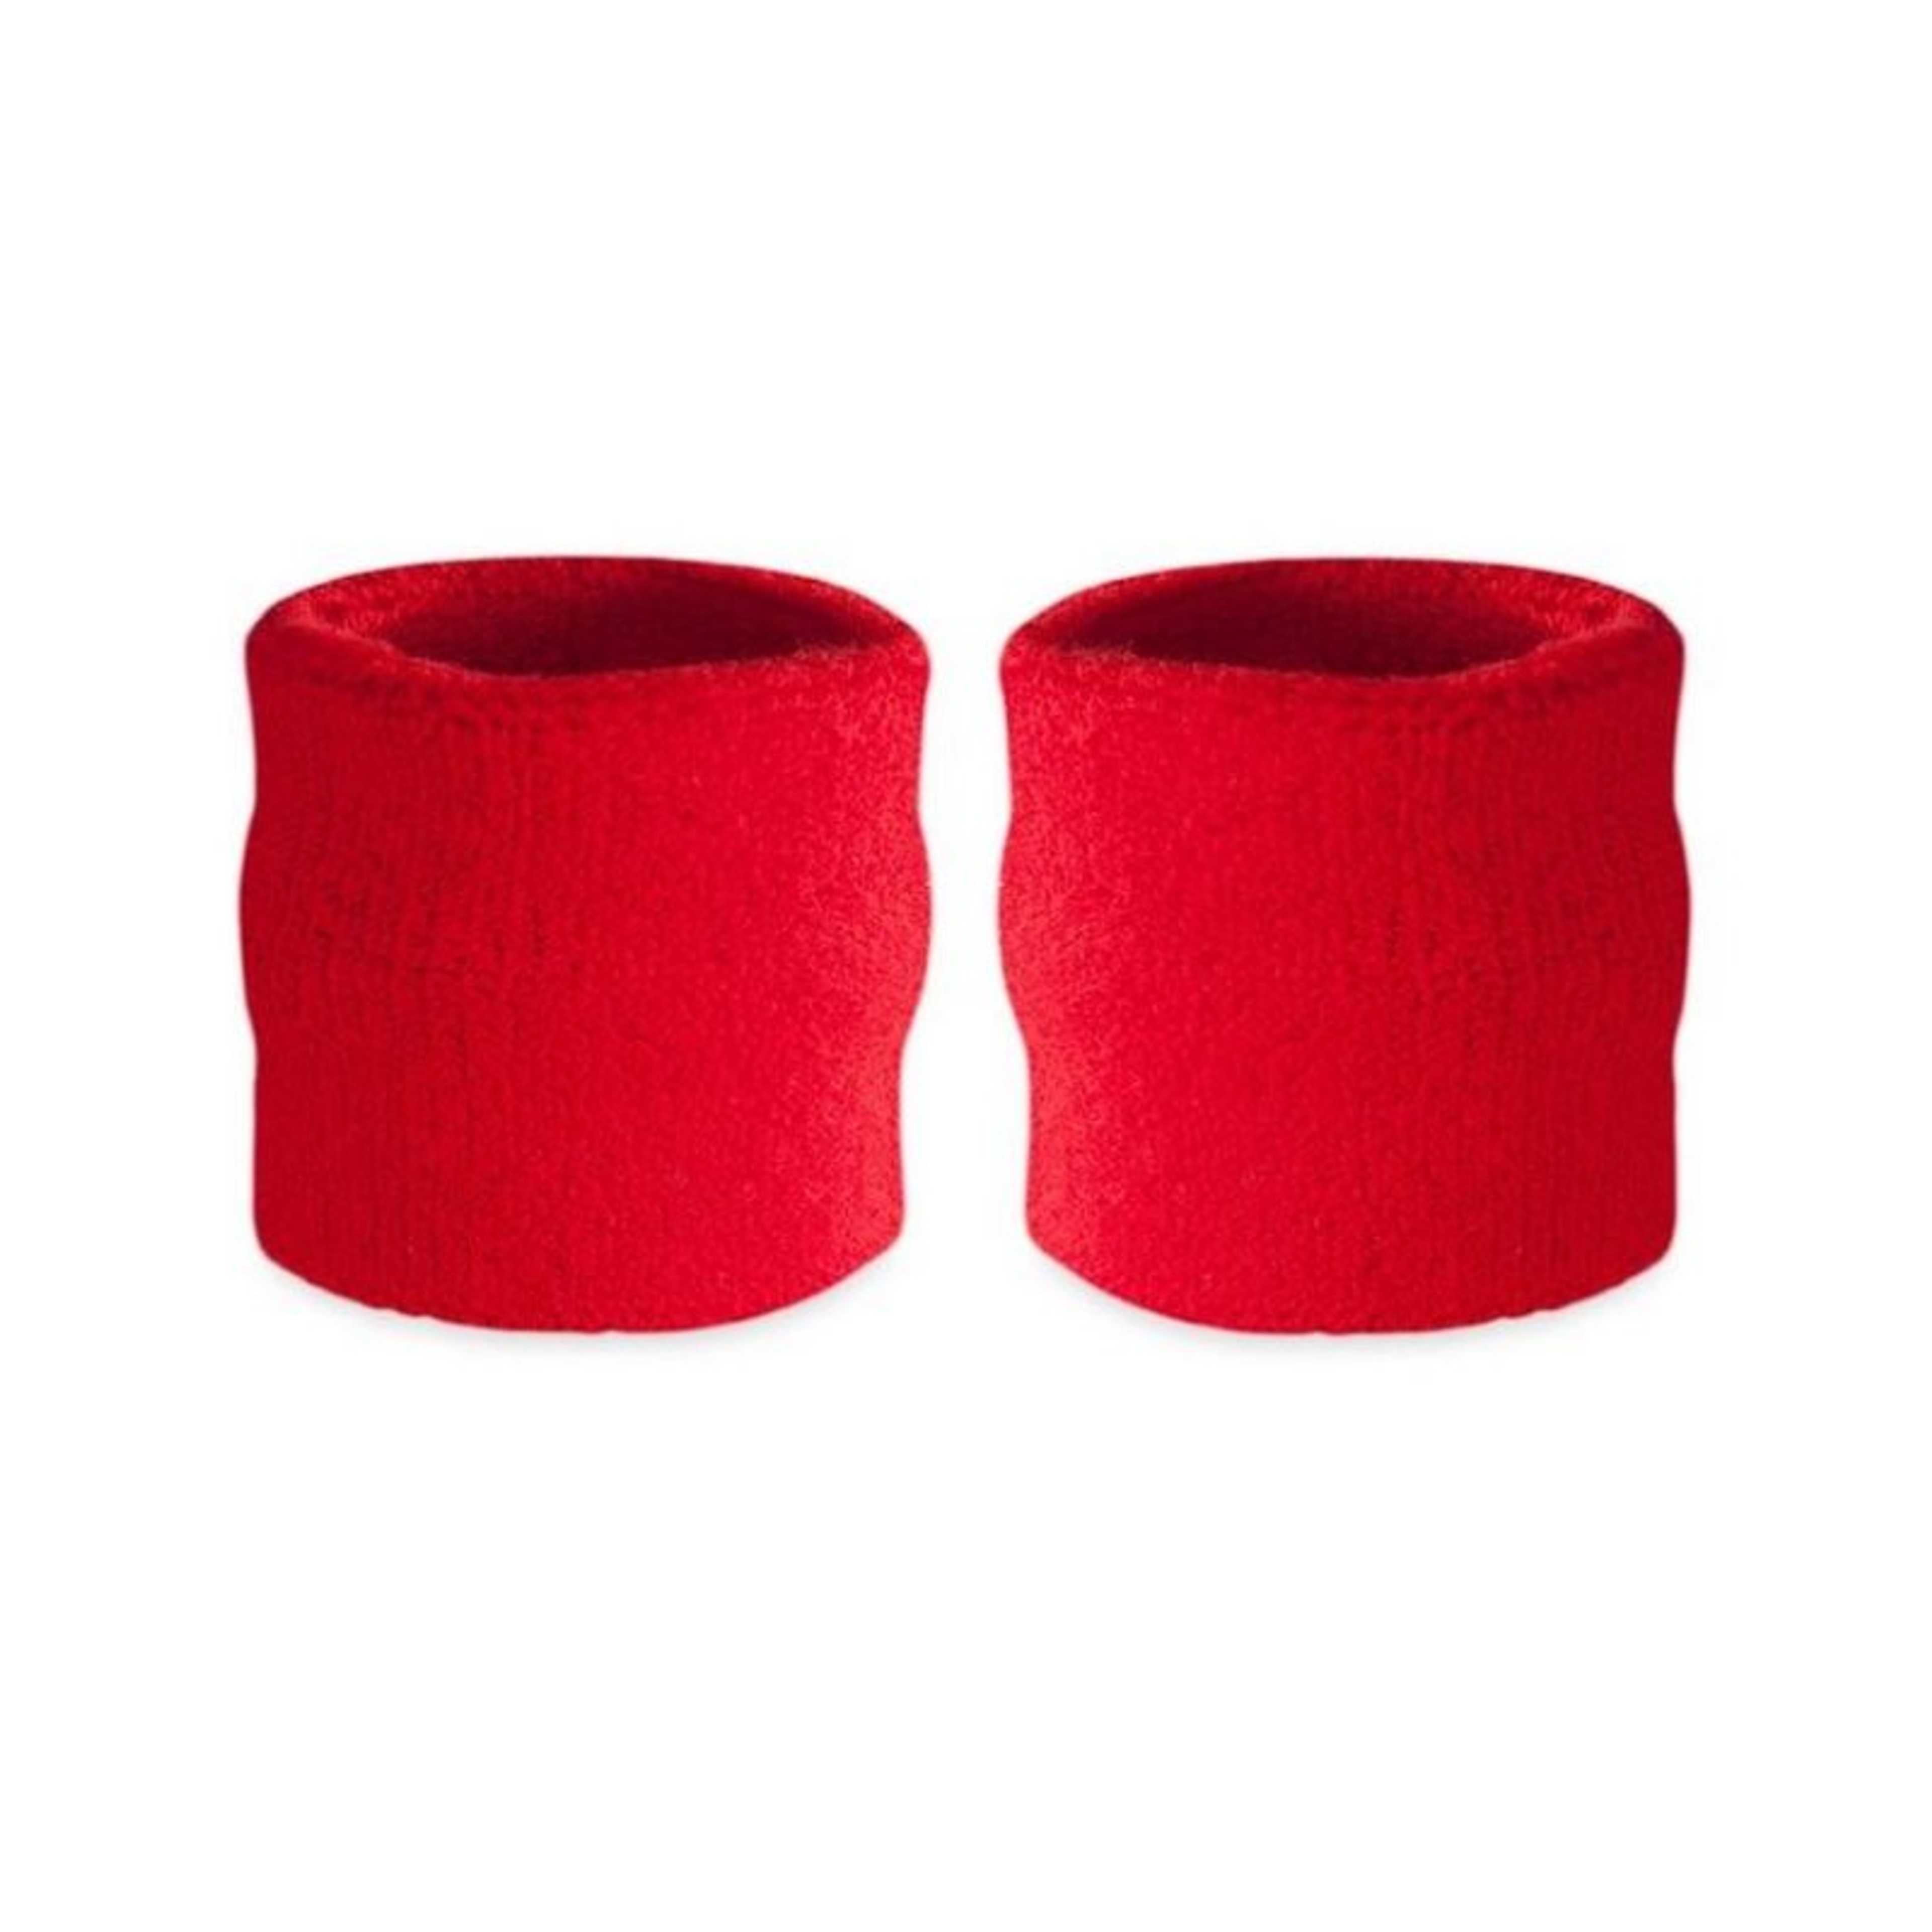 Pair of Wrist Band - Red